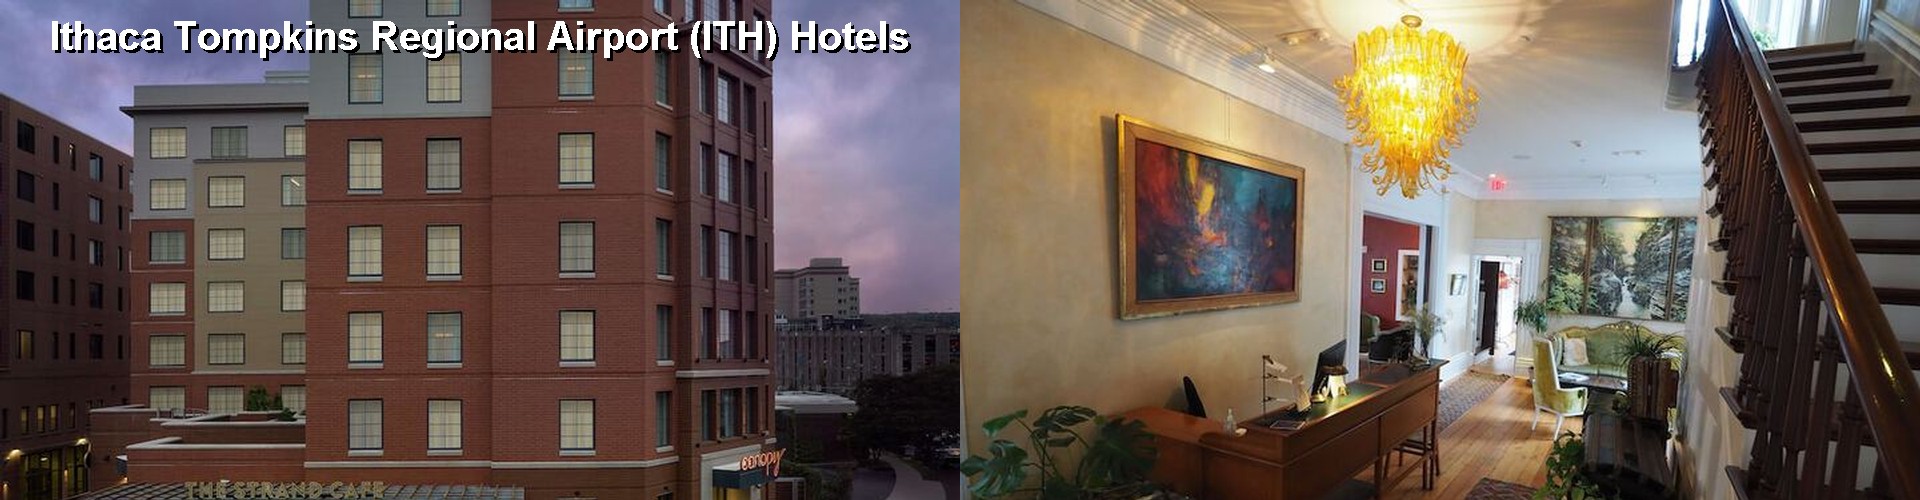 4 Best Hotels near Ithaca Tompkins Regional Airport (ITH)